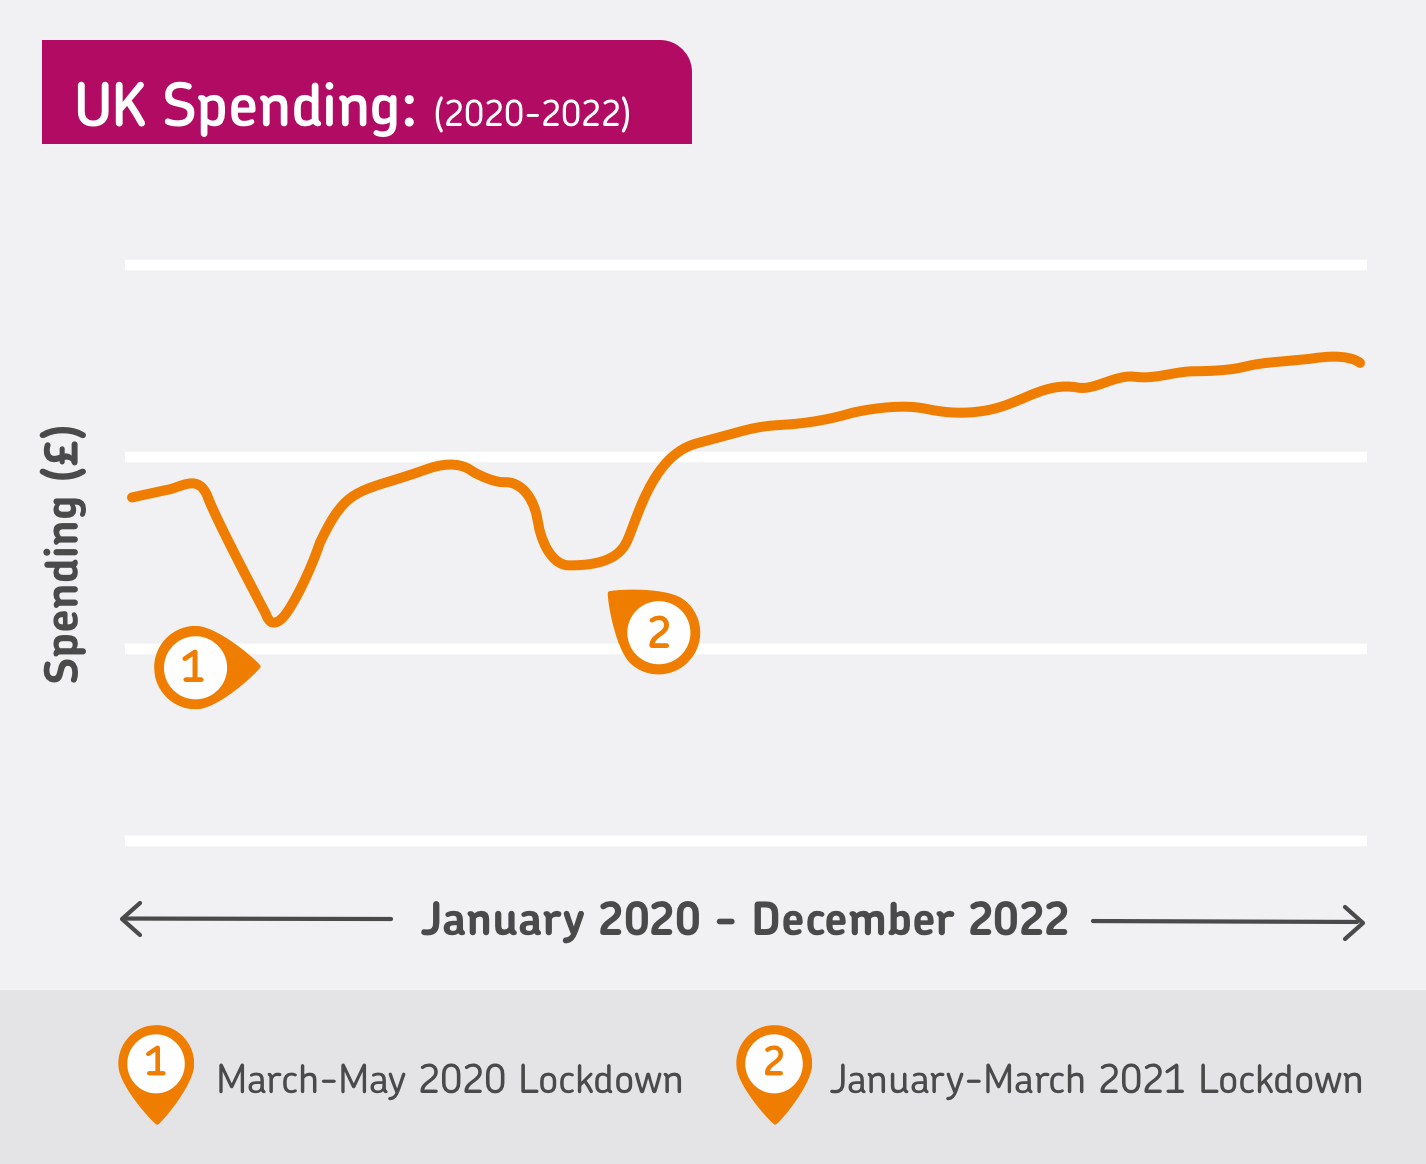 Graph displaying UK spending data for January 2020 to December 2022